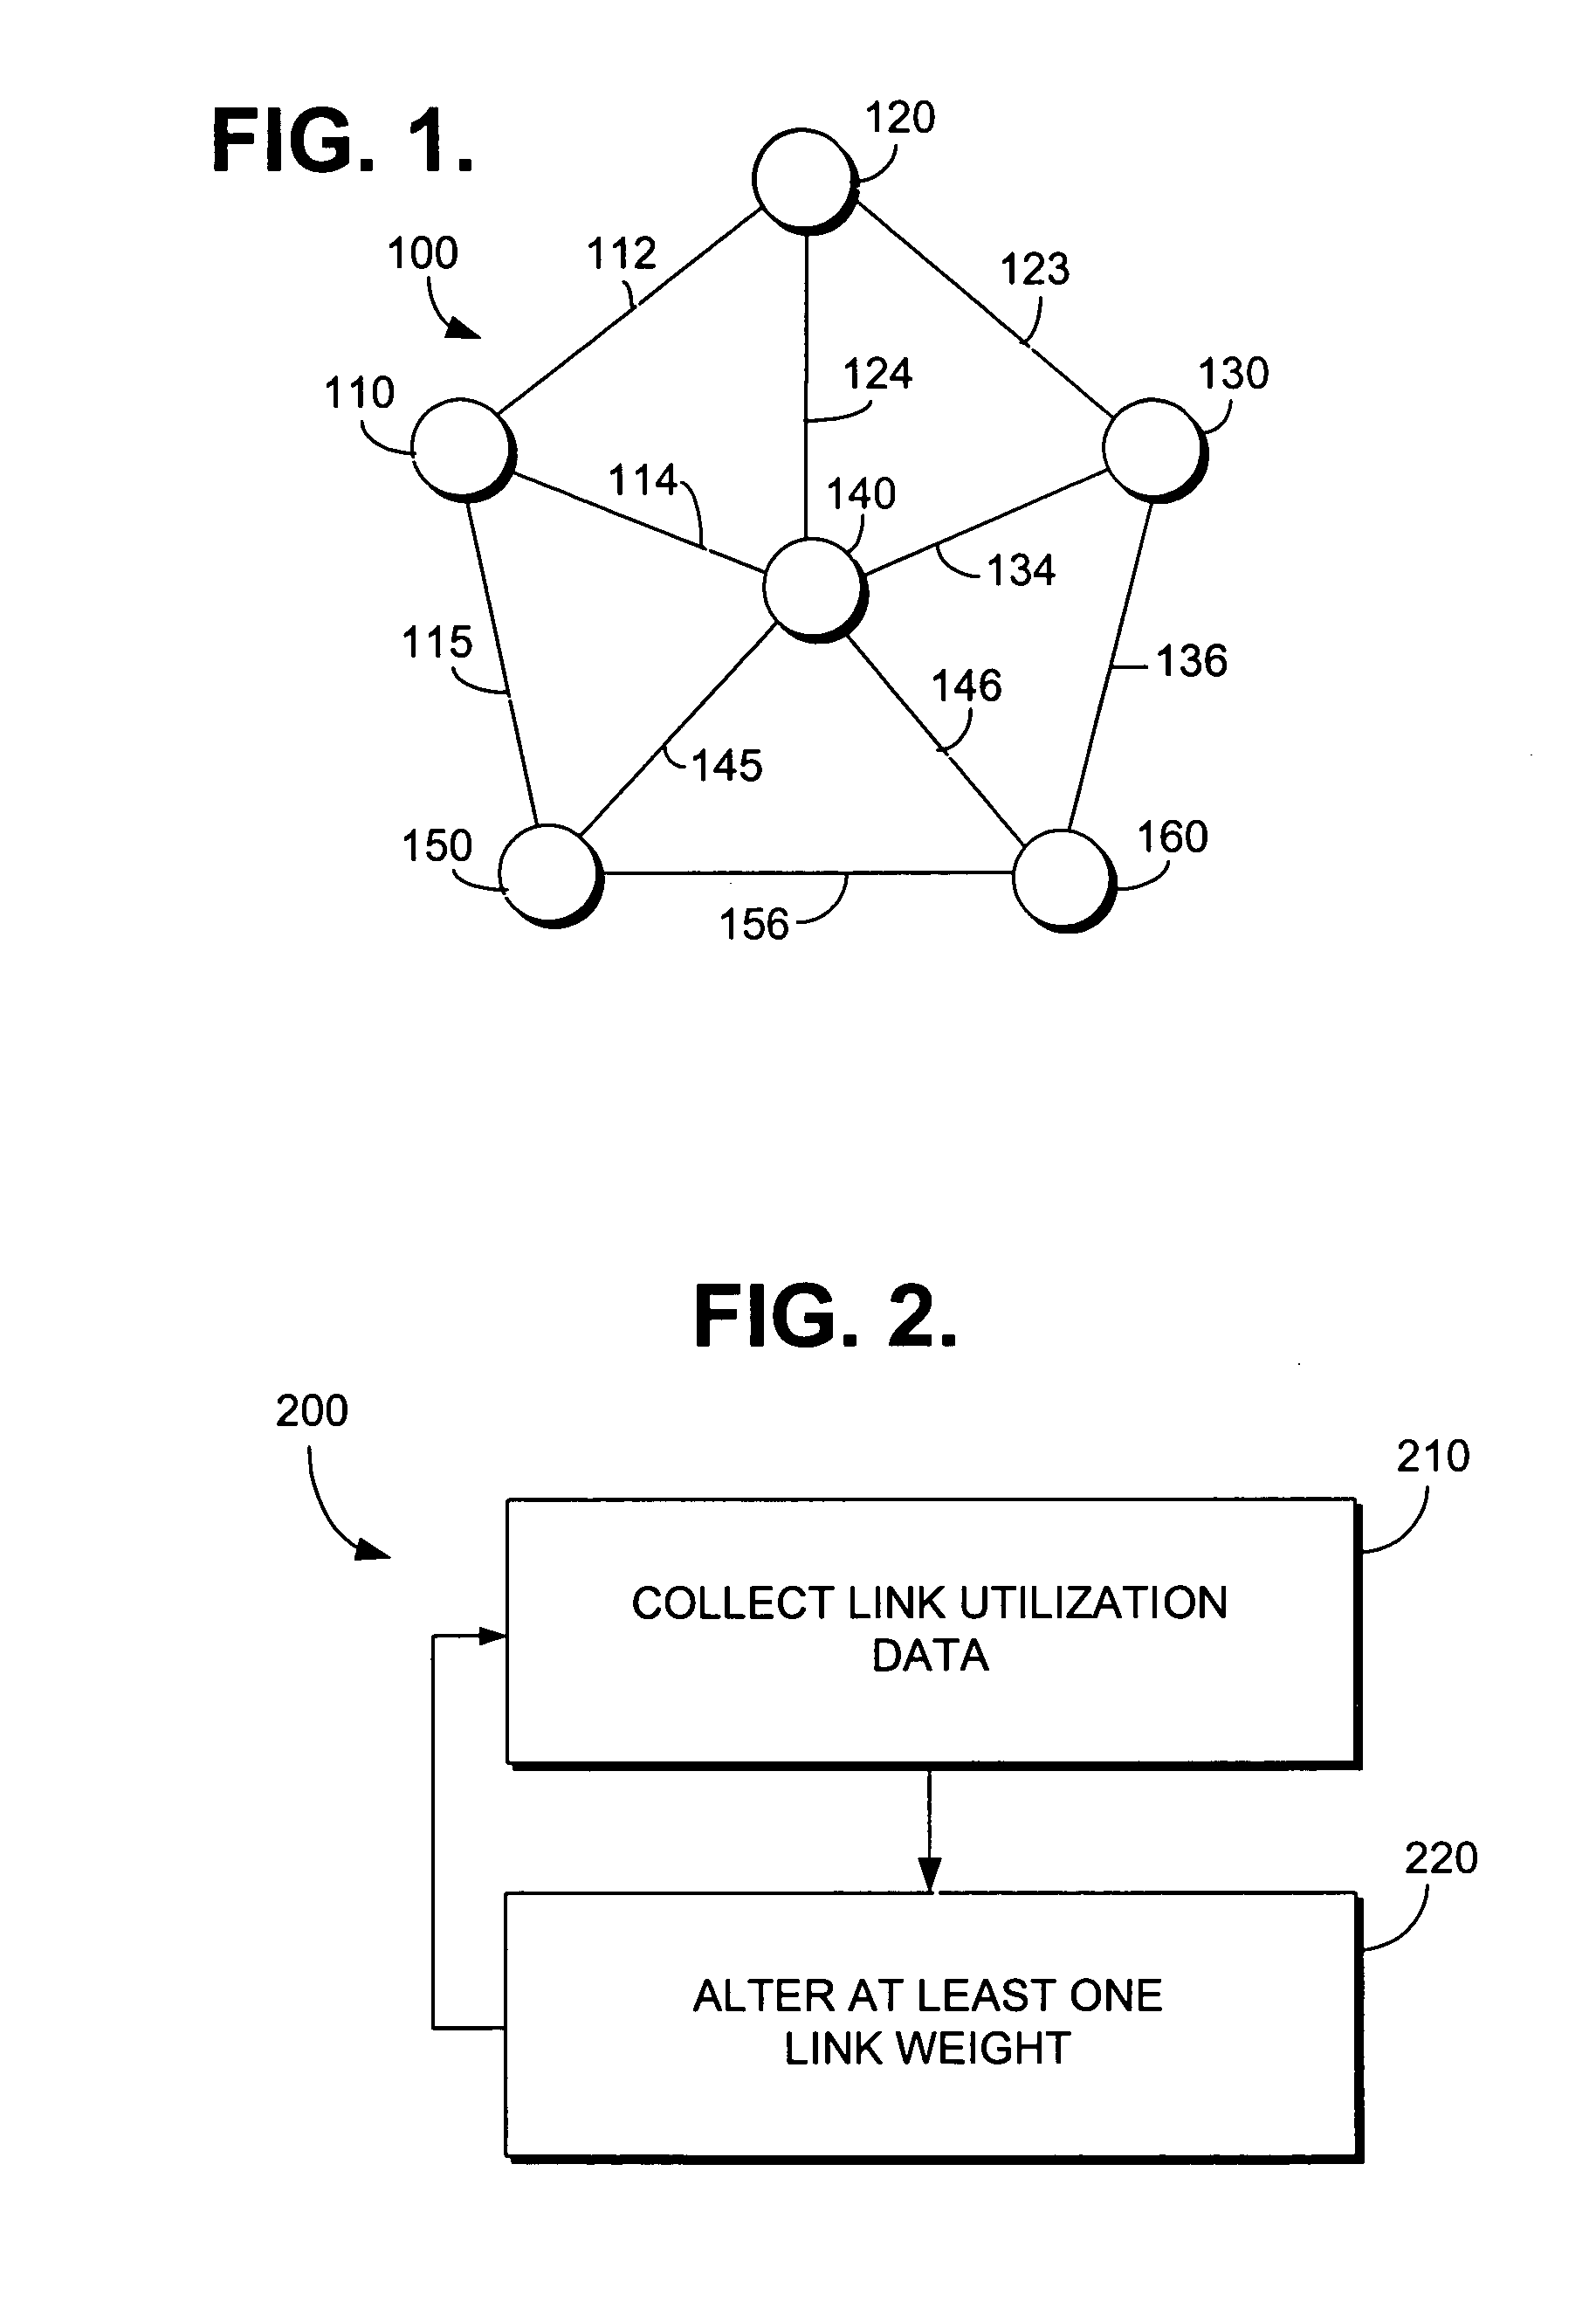 Method for estimating telecommunication network traffic using link weight changes